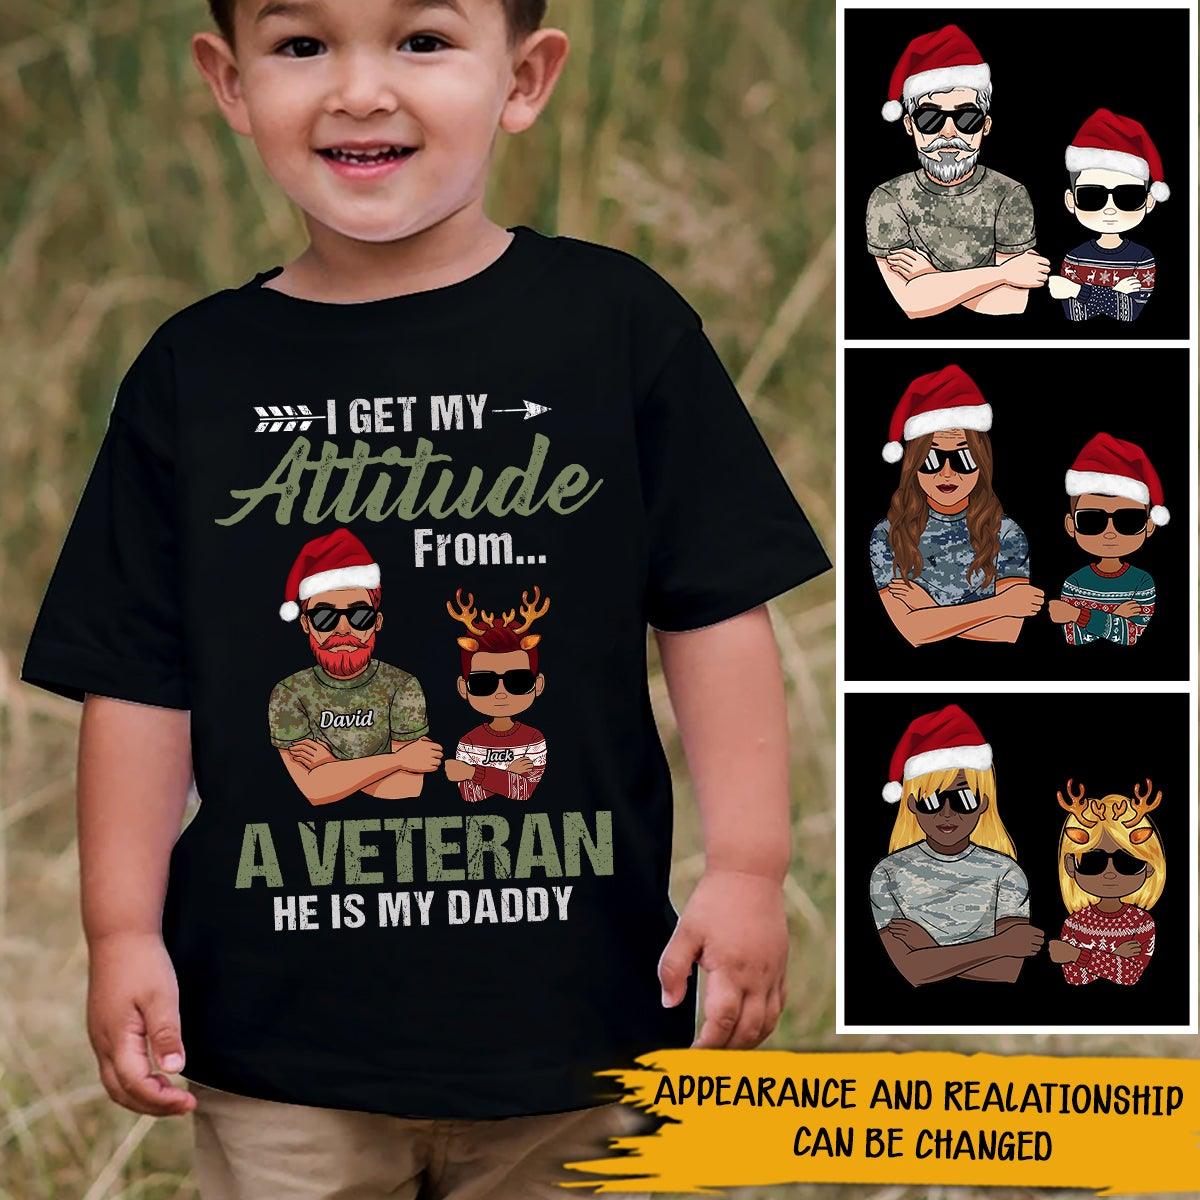 Veteran's Daughter Custom Shirt I Get My Attitude From A Veteran Personalized Gift - PERSONAL84